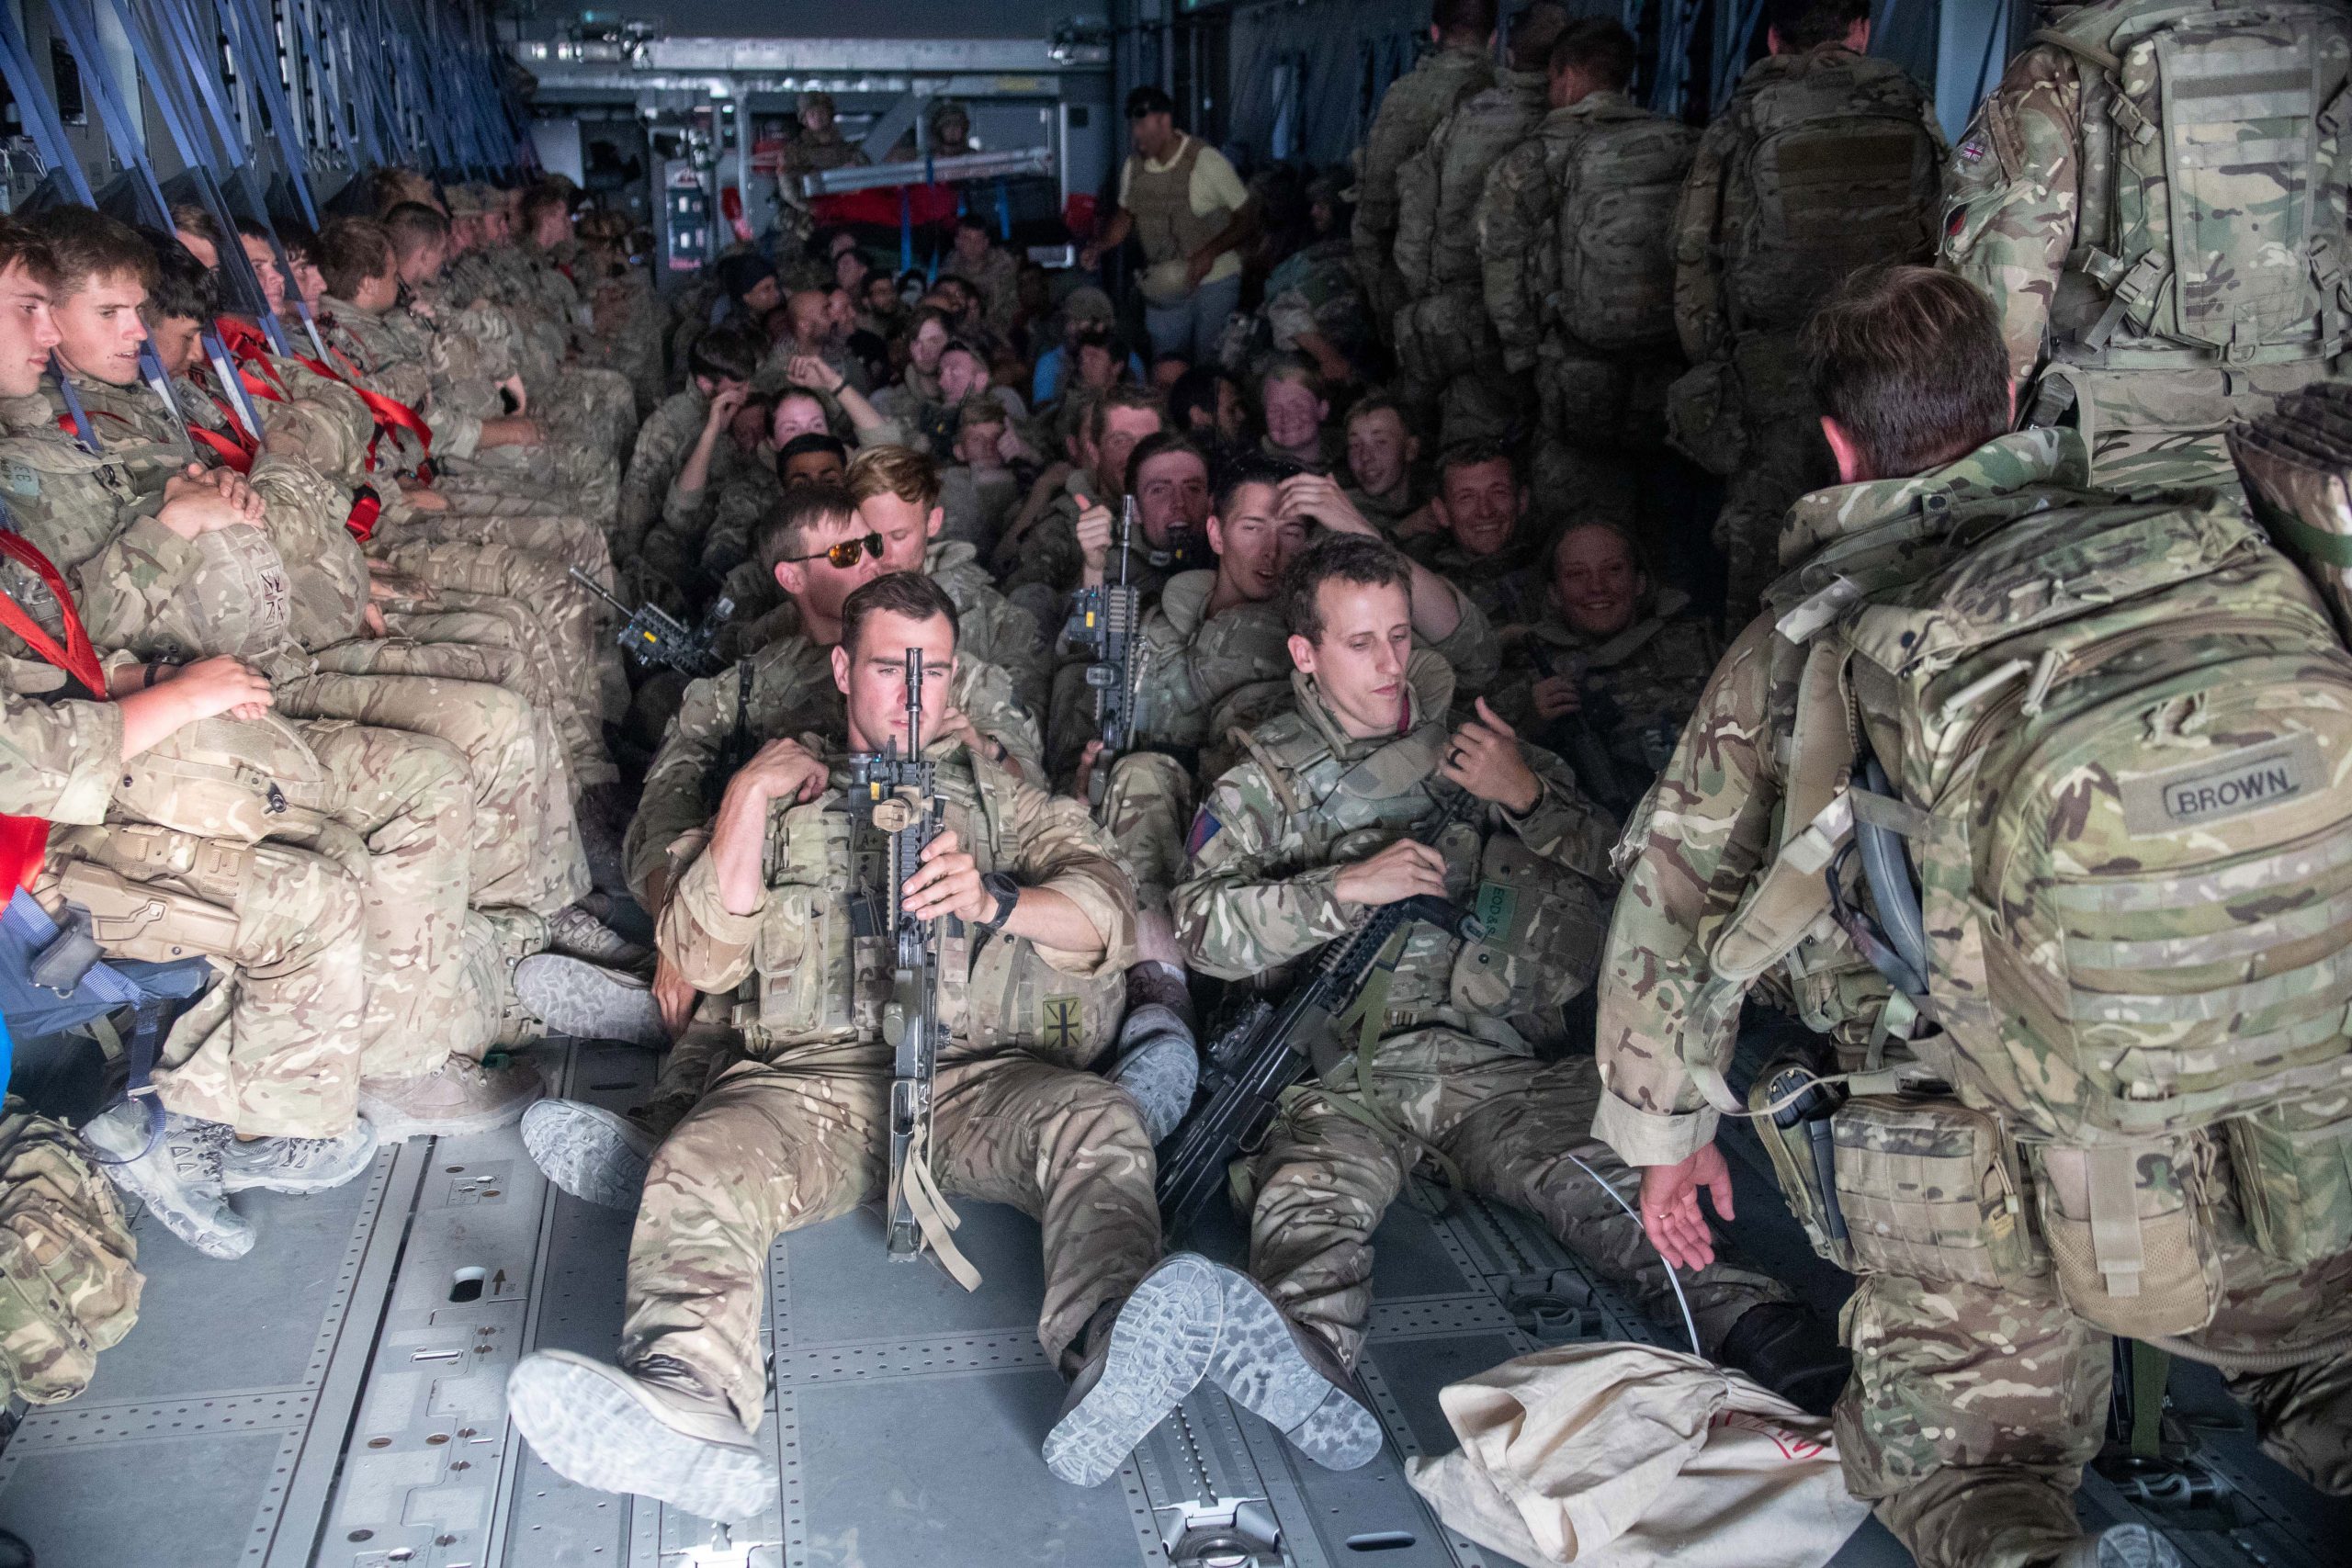 epa09434545 A handout picture provided by the British Ministry of Defence (MOD) shows UK military personnel onboard a A400M aircraft departing Kabul, Afghanistan, 28 August 2021, as part of Operation PITTING. Eligible Afghans are also being evacuated to the UK via the UAE under the Afghan Relocation and Assistance Program (ARAP). Some will land and be processed at RAF Brize Norton (BZZ).  EPA/JONATHAN GIFFORD / BRITISH MINISTRY OF DEFENCE / HANDOUT MANDATORY CREDIT: MOD/CROWN COPYRIGHT HANDOUT EDITORIAL USE ONLY/NO SALES